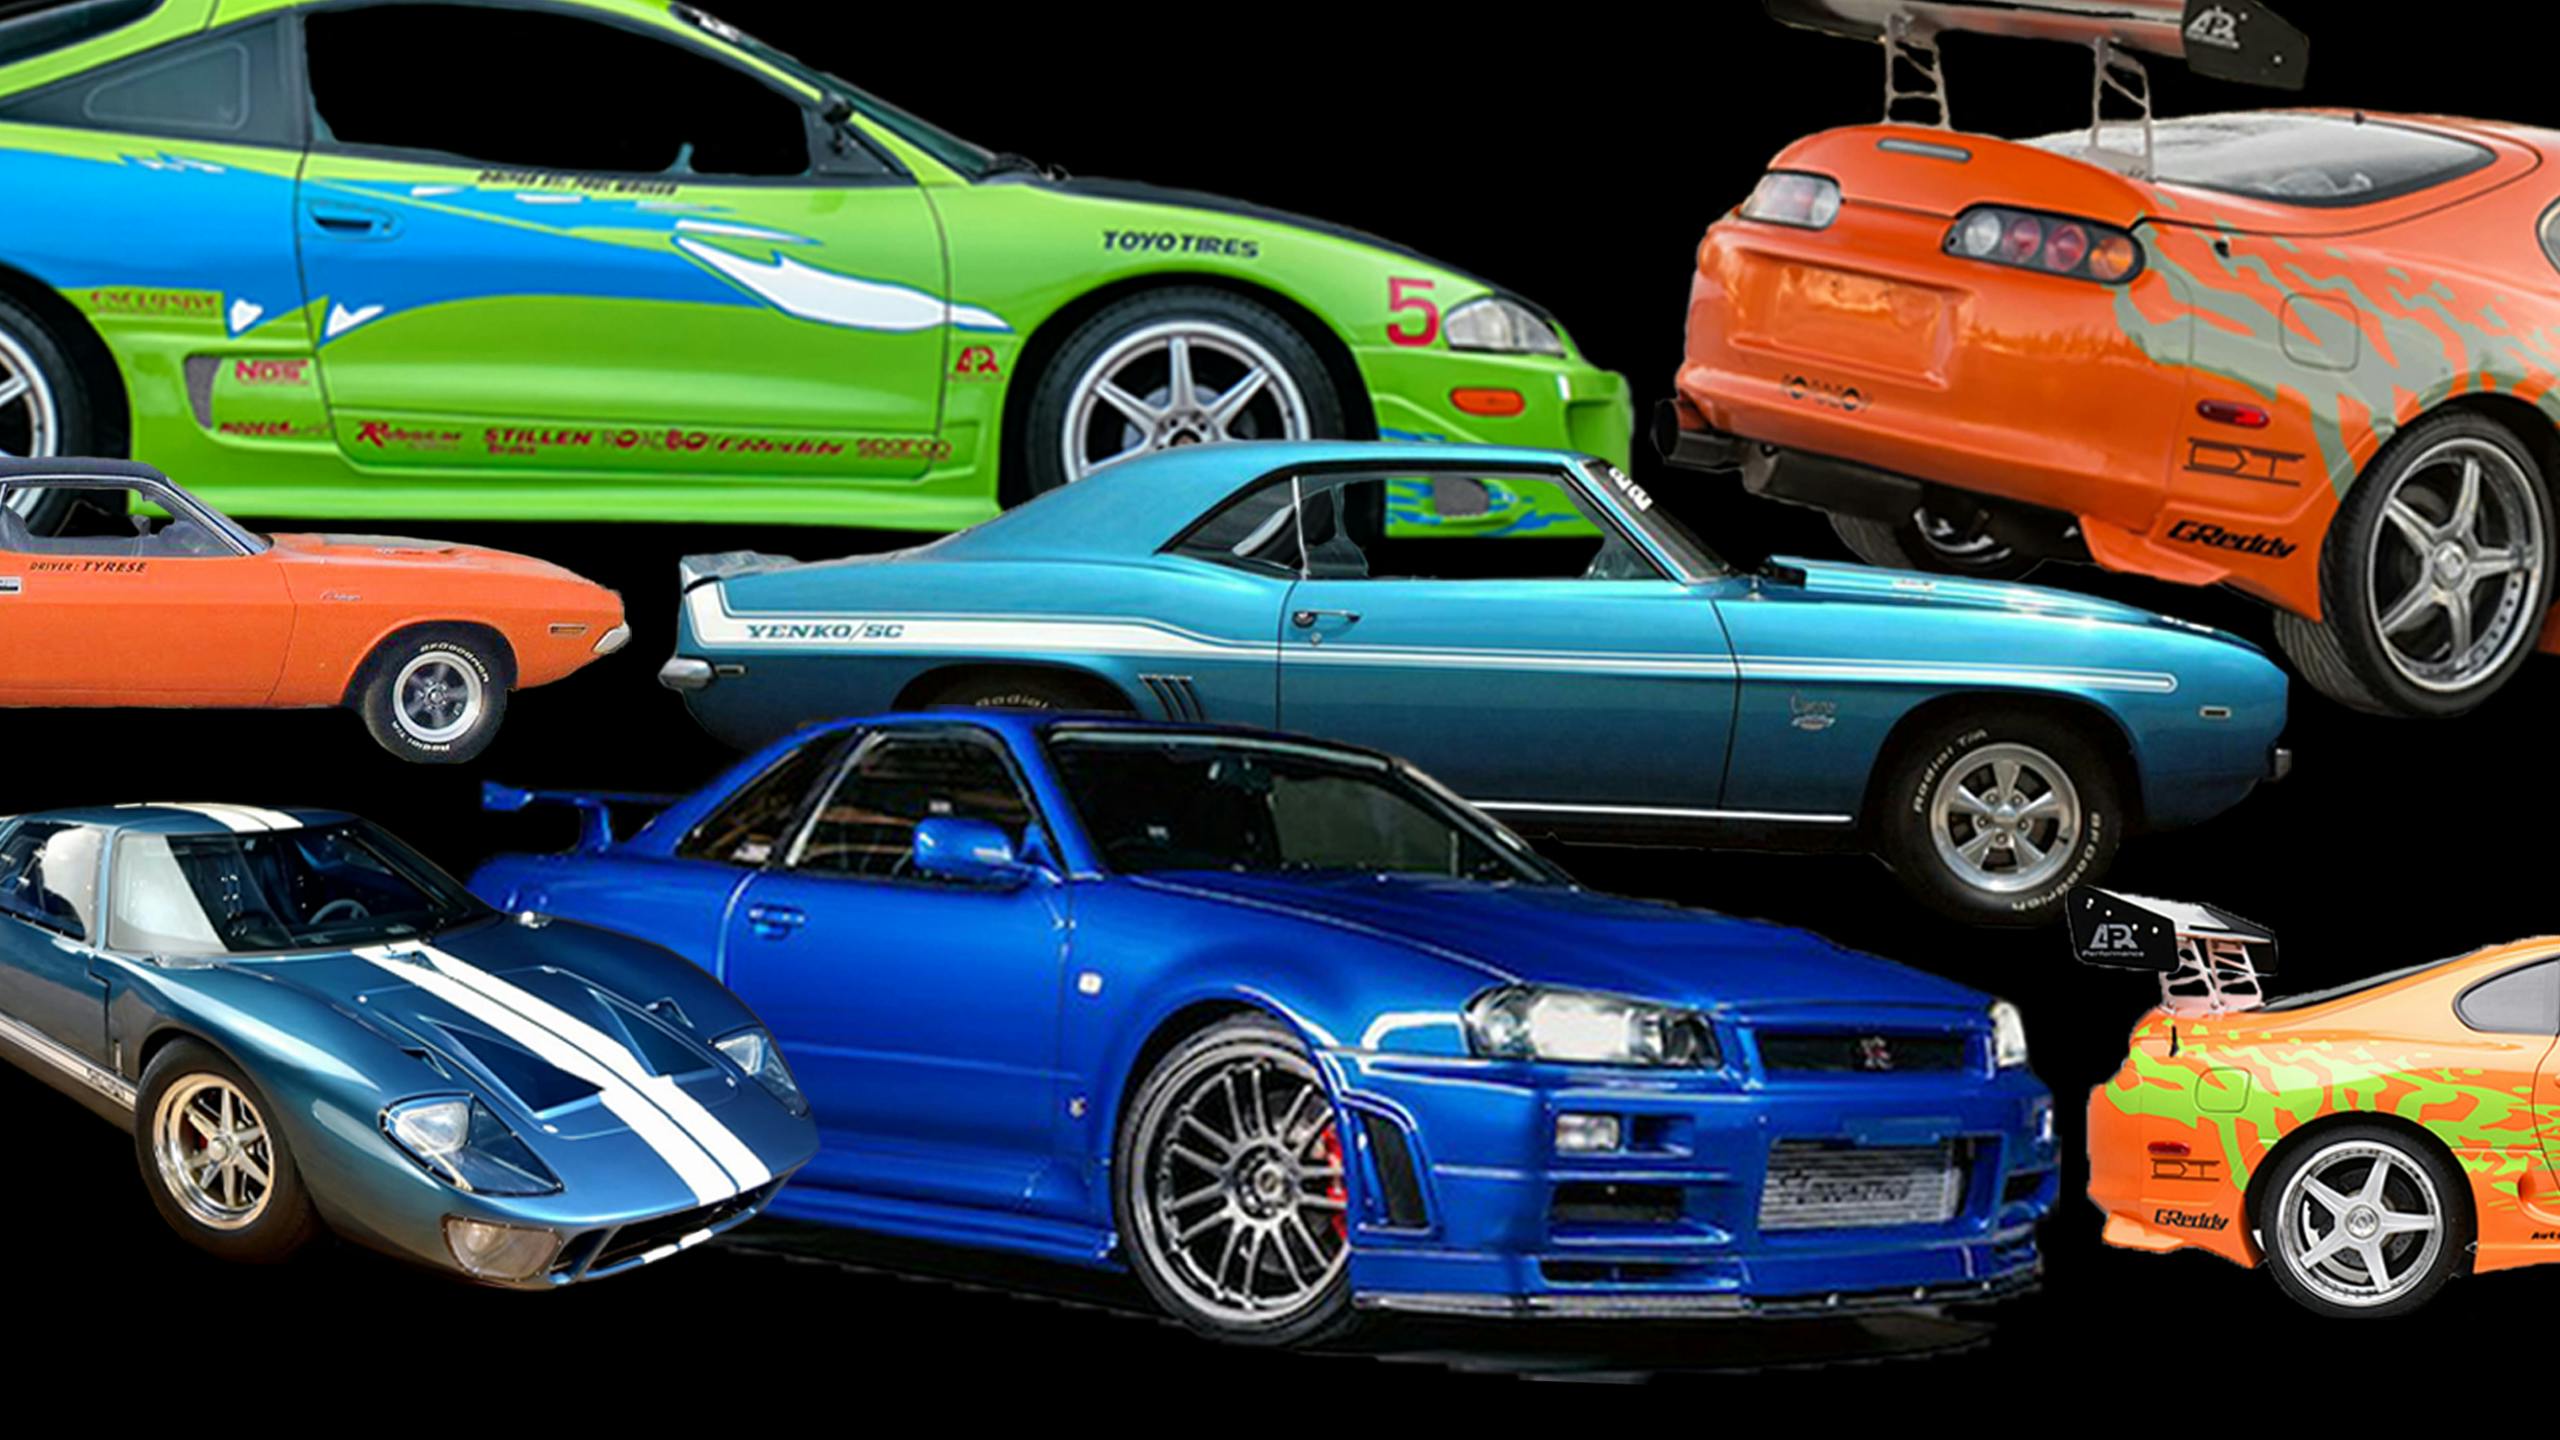 The 7 most expensive Fast & Furious movie cars ever sold - Hagerty